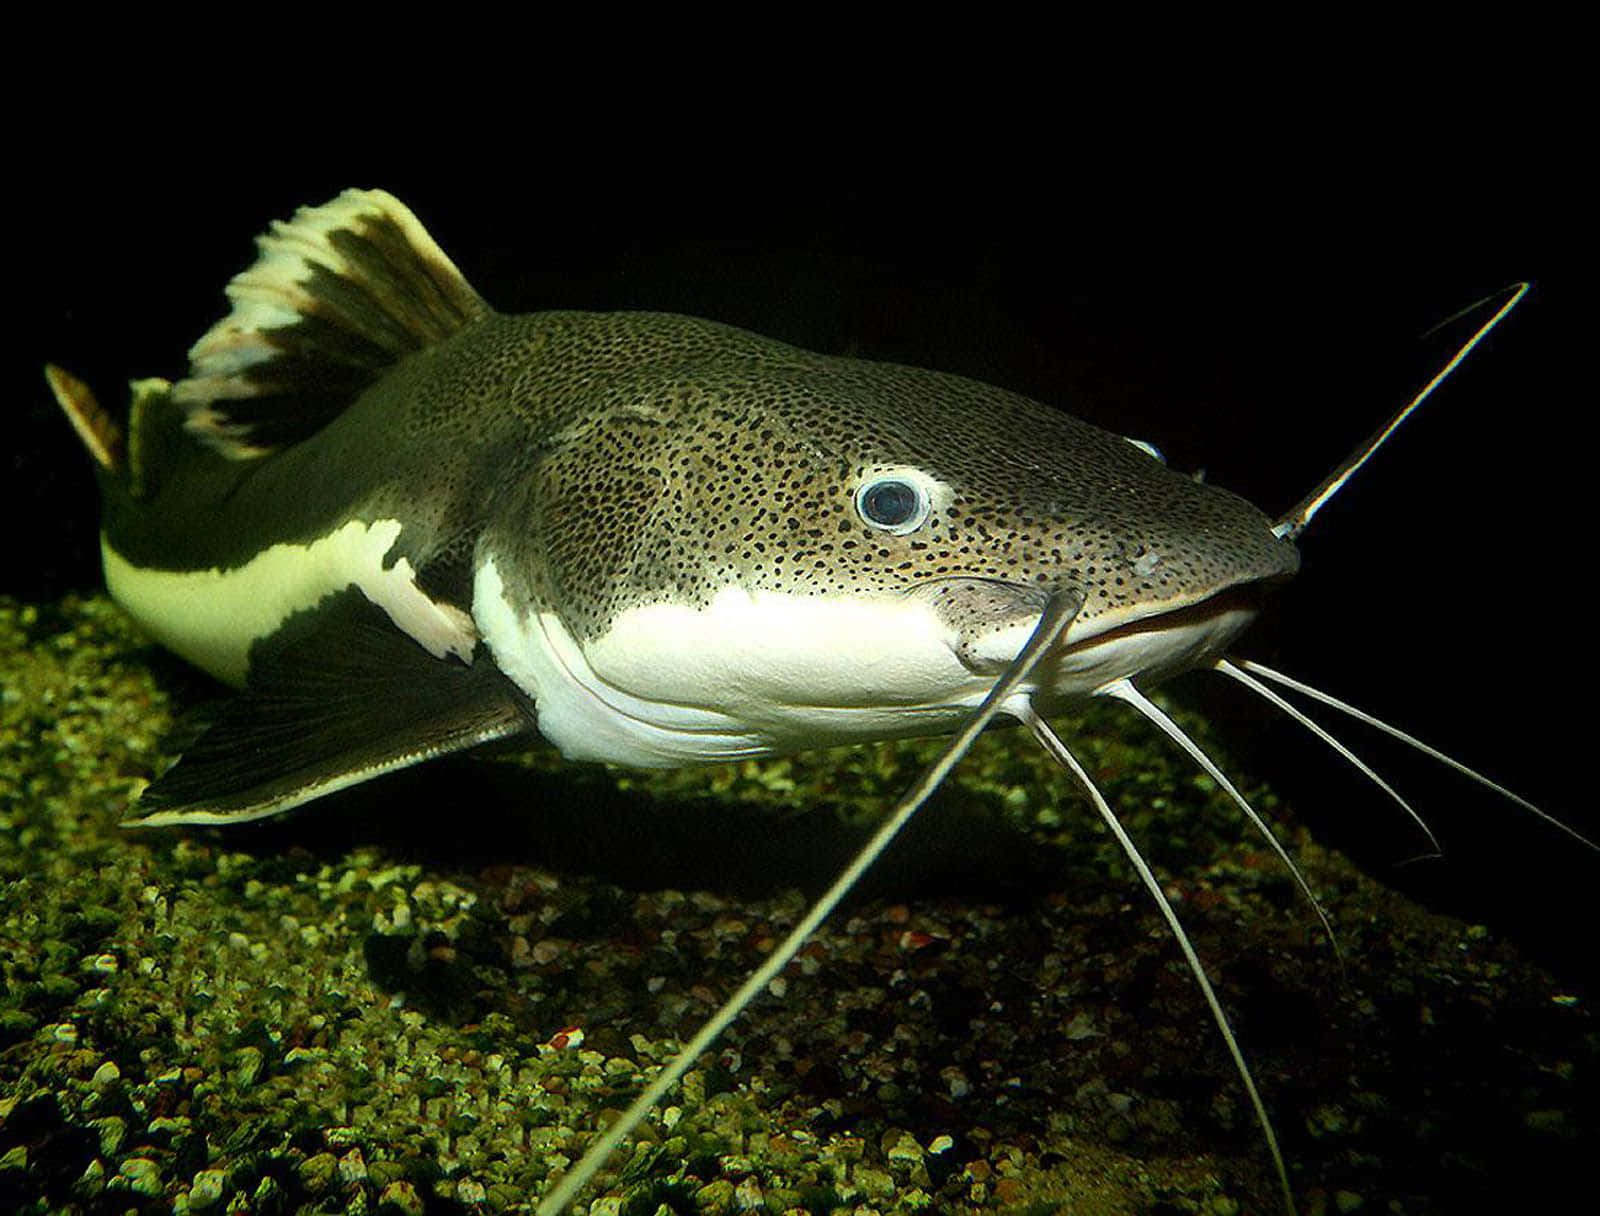 A close-up of a catfish swimming underwater in a dark environment.